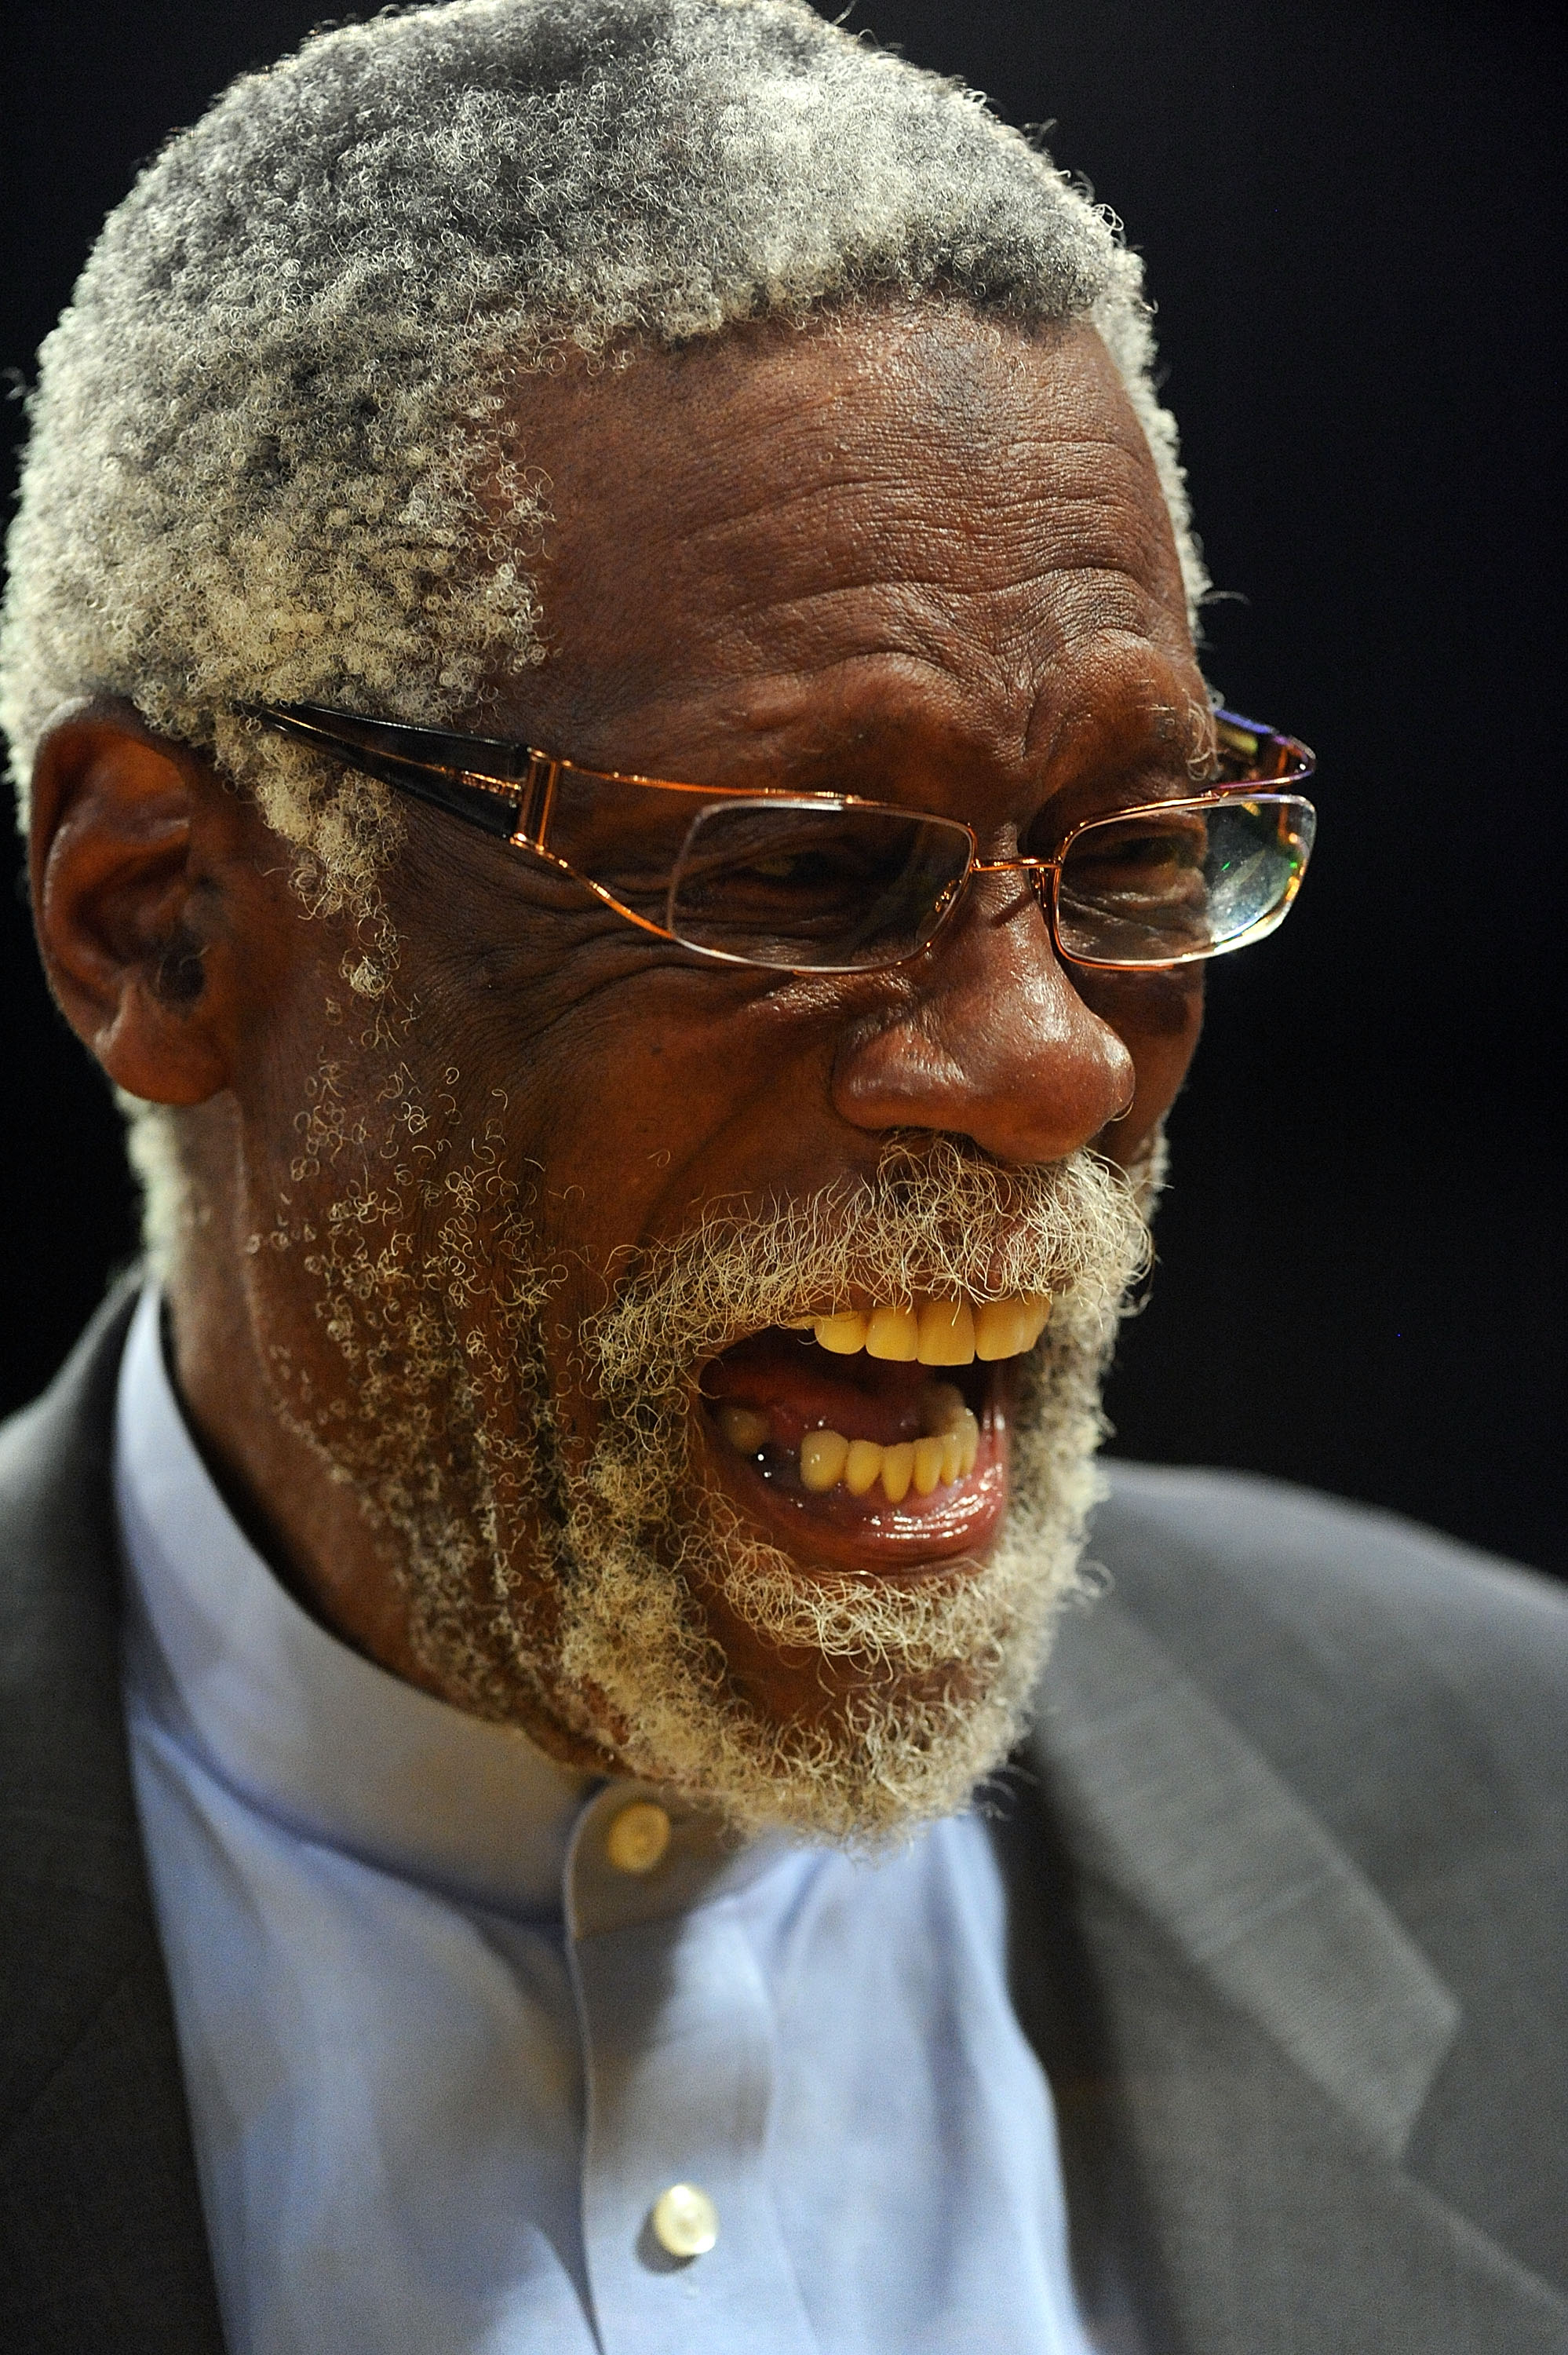 LOS ANGELES, CA - JUNE 15:  Former NBA player Bill Russell stands on the court before Game Six of the 2010 NBA Finals at Staples Center between the Los Angeles Lakers and the Boston Celtics on June 15, 2010 in Los Angeles, California.  NOTE TO USER: User